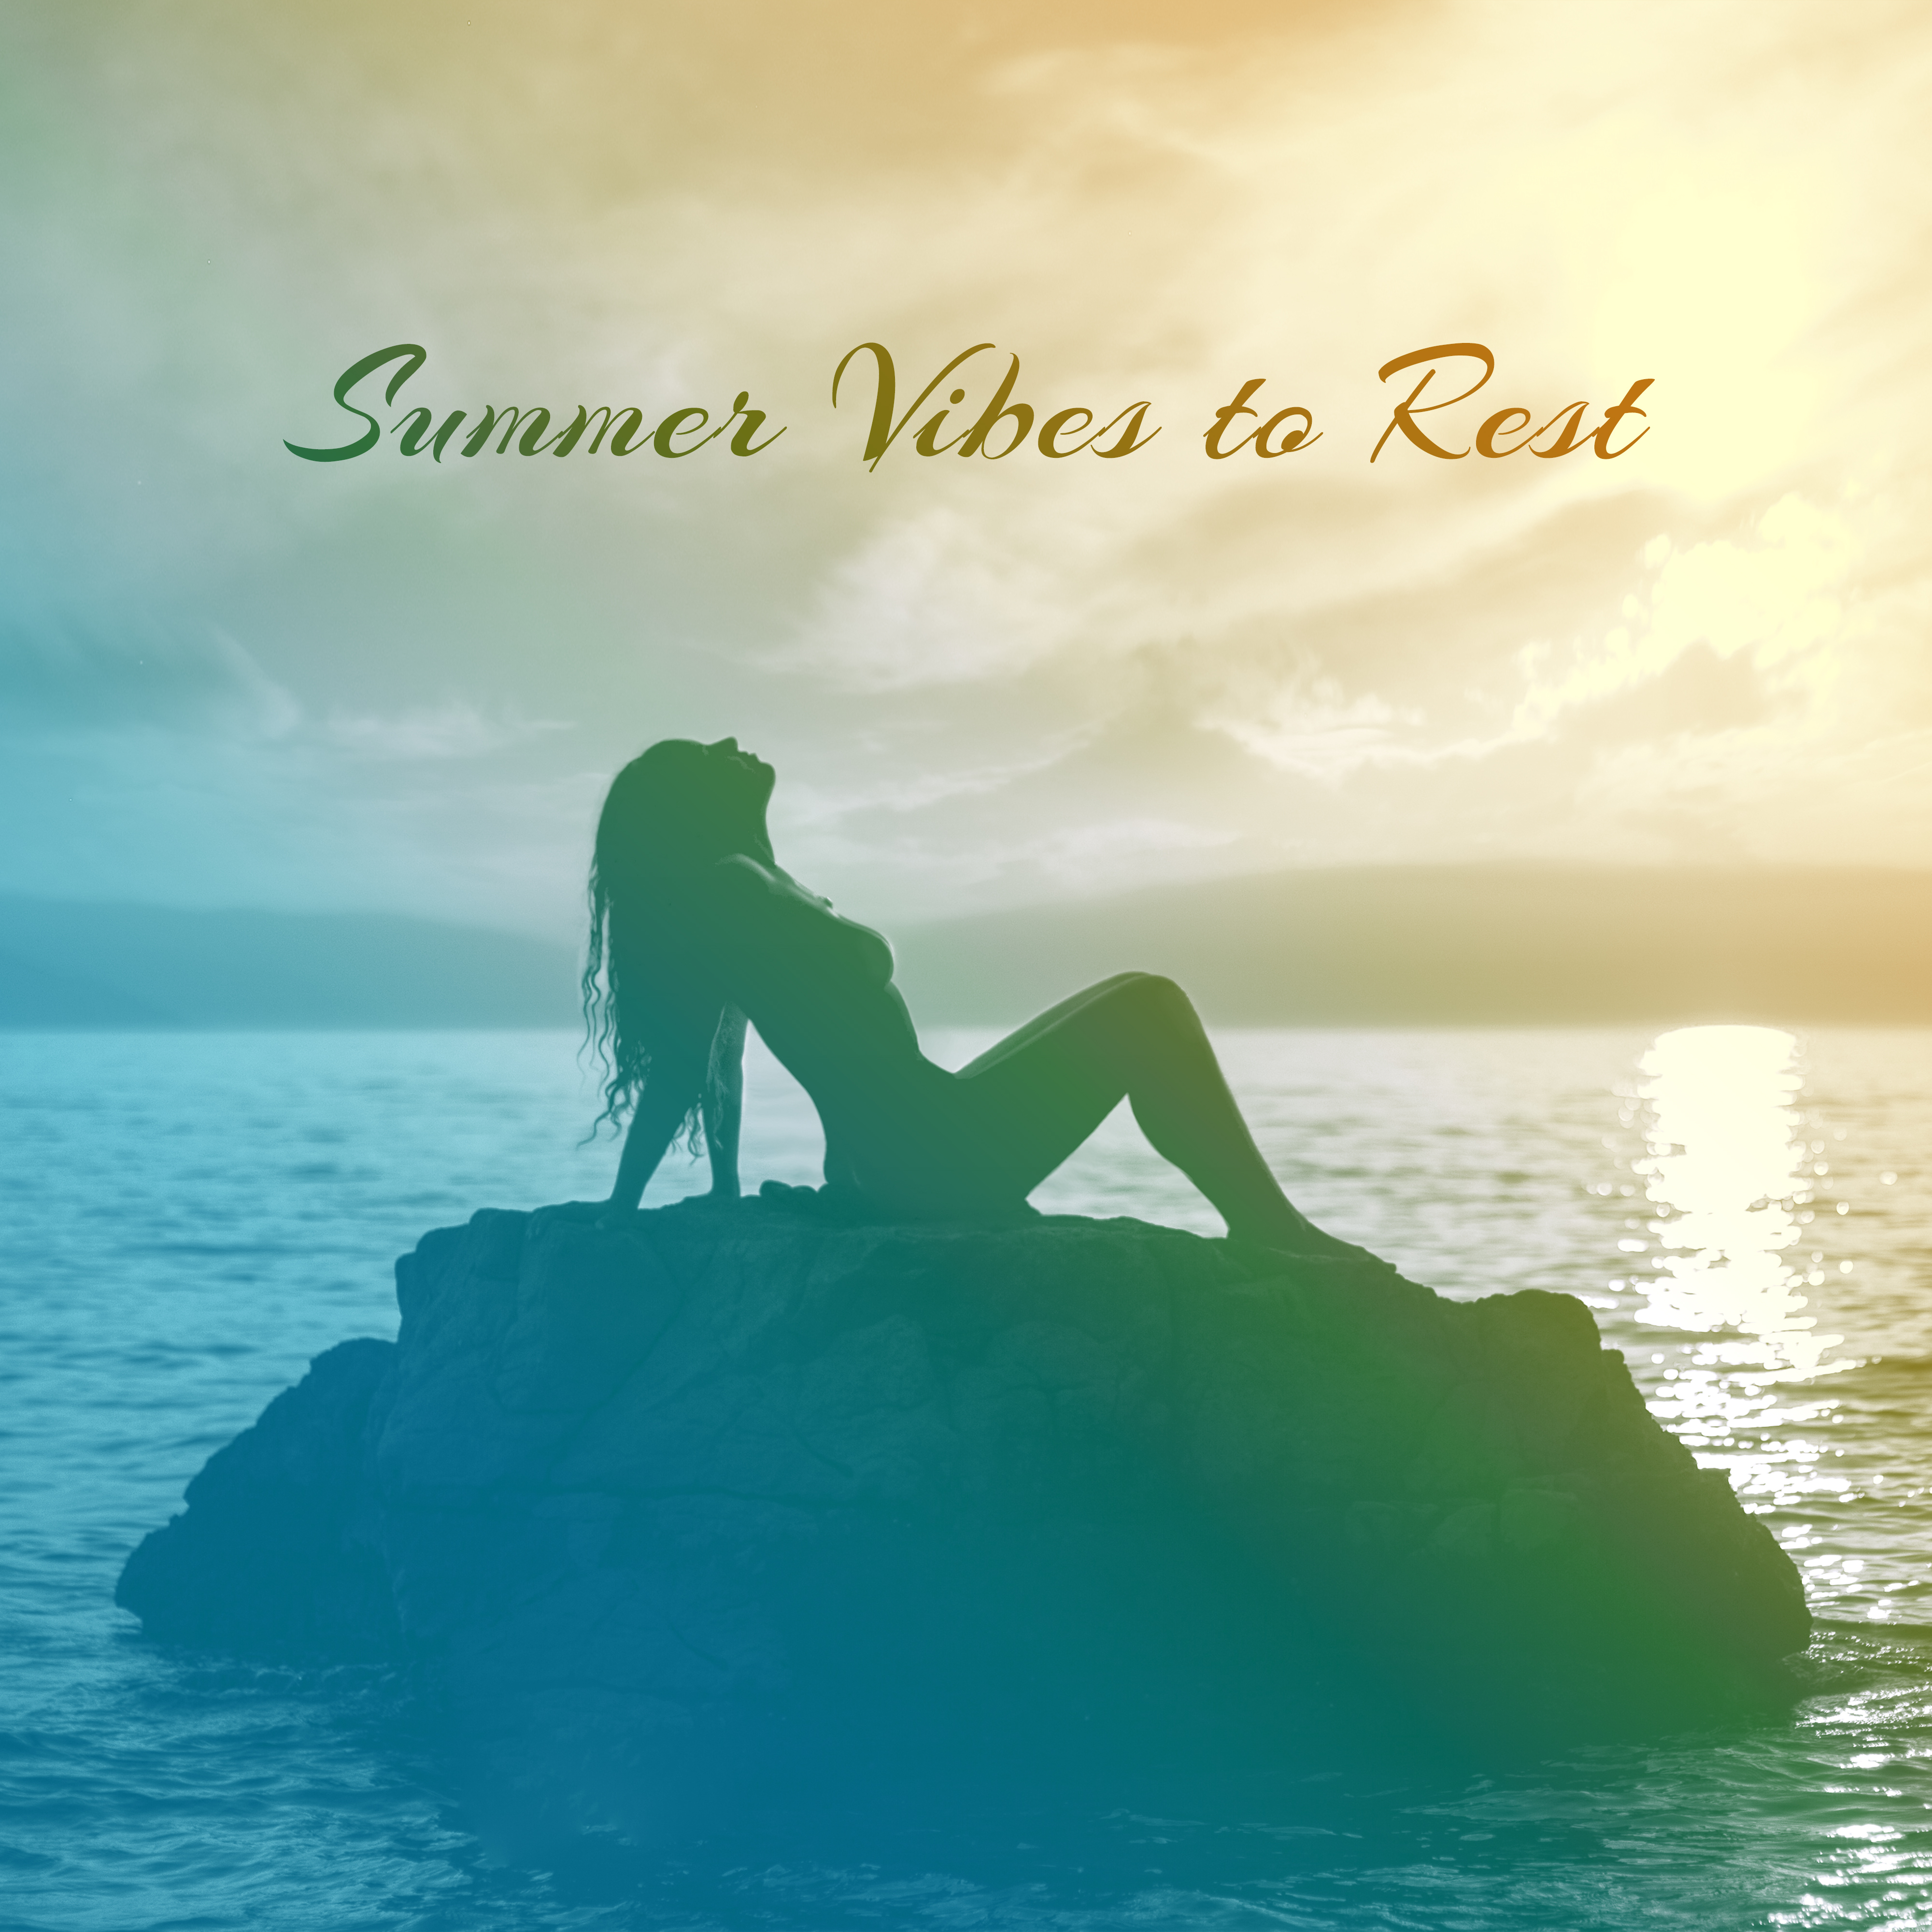 Summer Vibes to Rest – Chill Out Beats, Relaxing Beach Music, Summer Songs, Peaceful Holidays